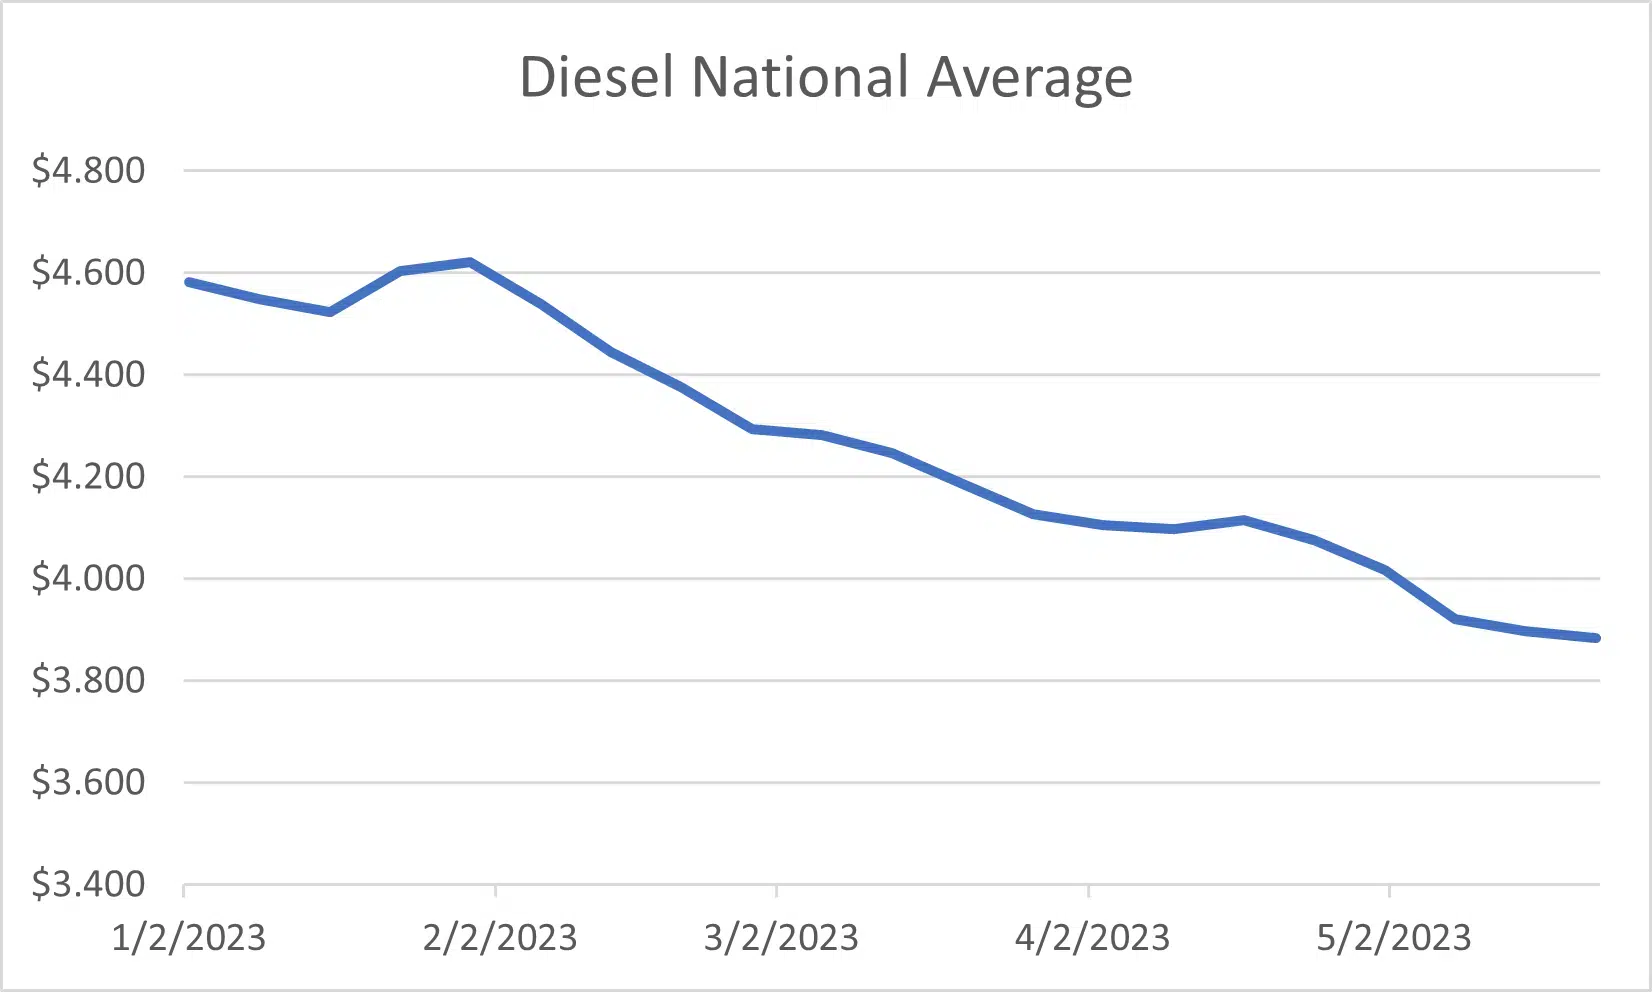 chart titled Diesel National Average (charts shows decline from February 2023 through May 2023)